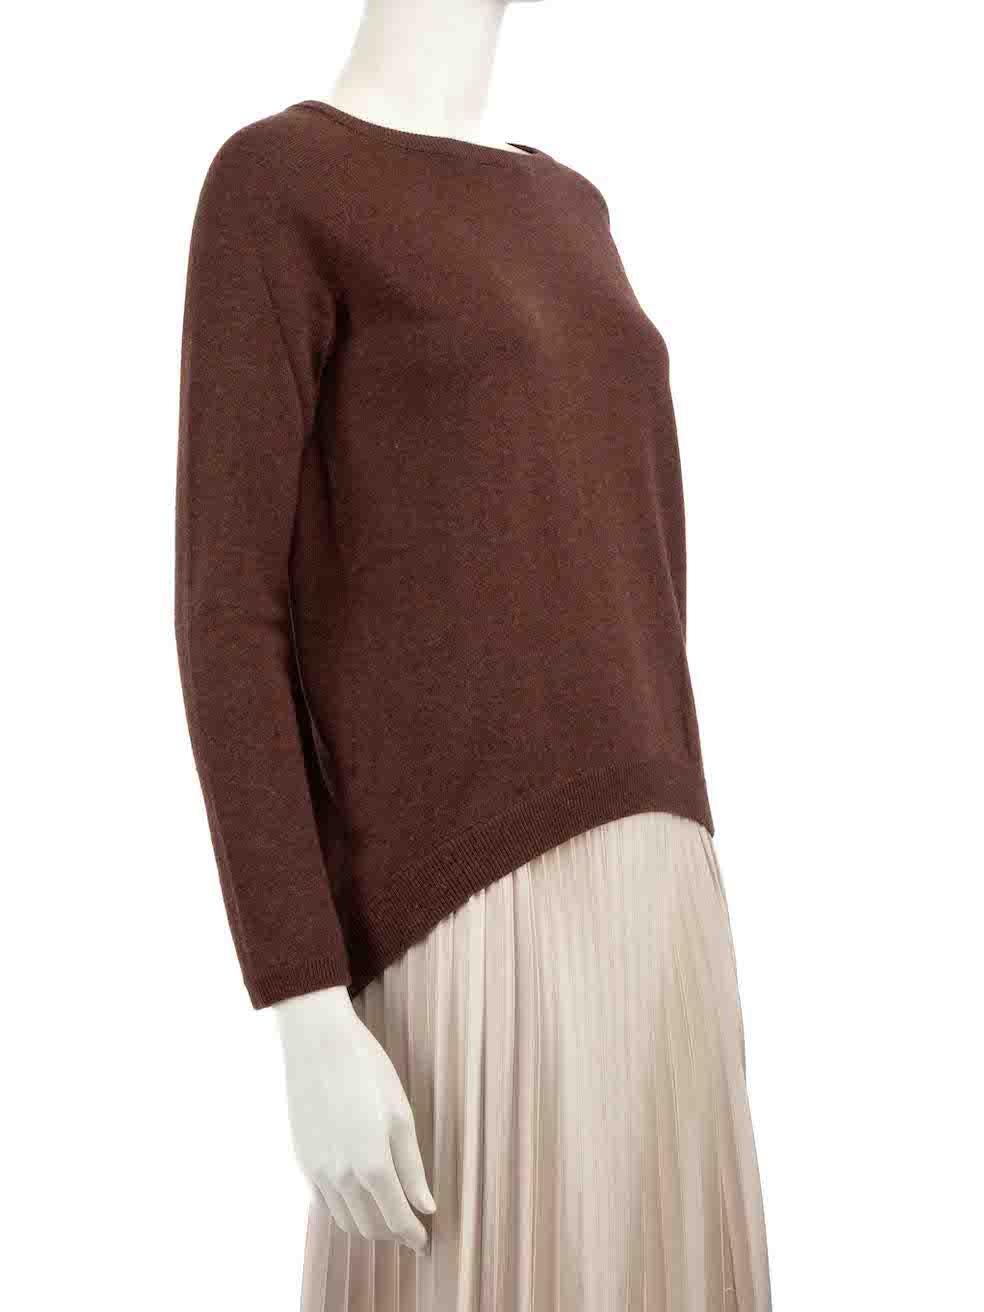 CONDITION is Very good. Hardly any visible wear to Jumper is evident on this used Brunello Cucinelli designer resale item.
 
 
 
 Details
 
 
 Brown
 
 Cashmere
 
 Long sleeves jumper
 
 Knitted and stretchy
 
 Crew neckline
 
 High low curved